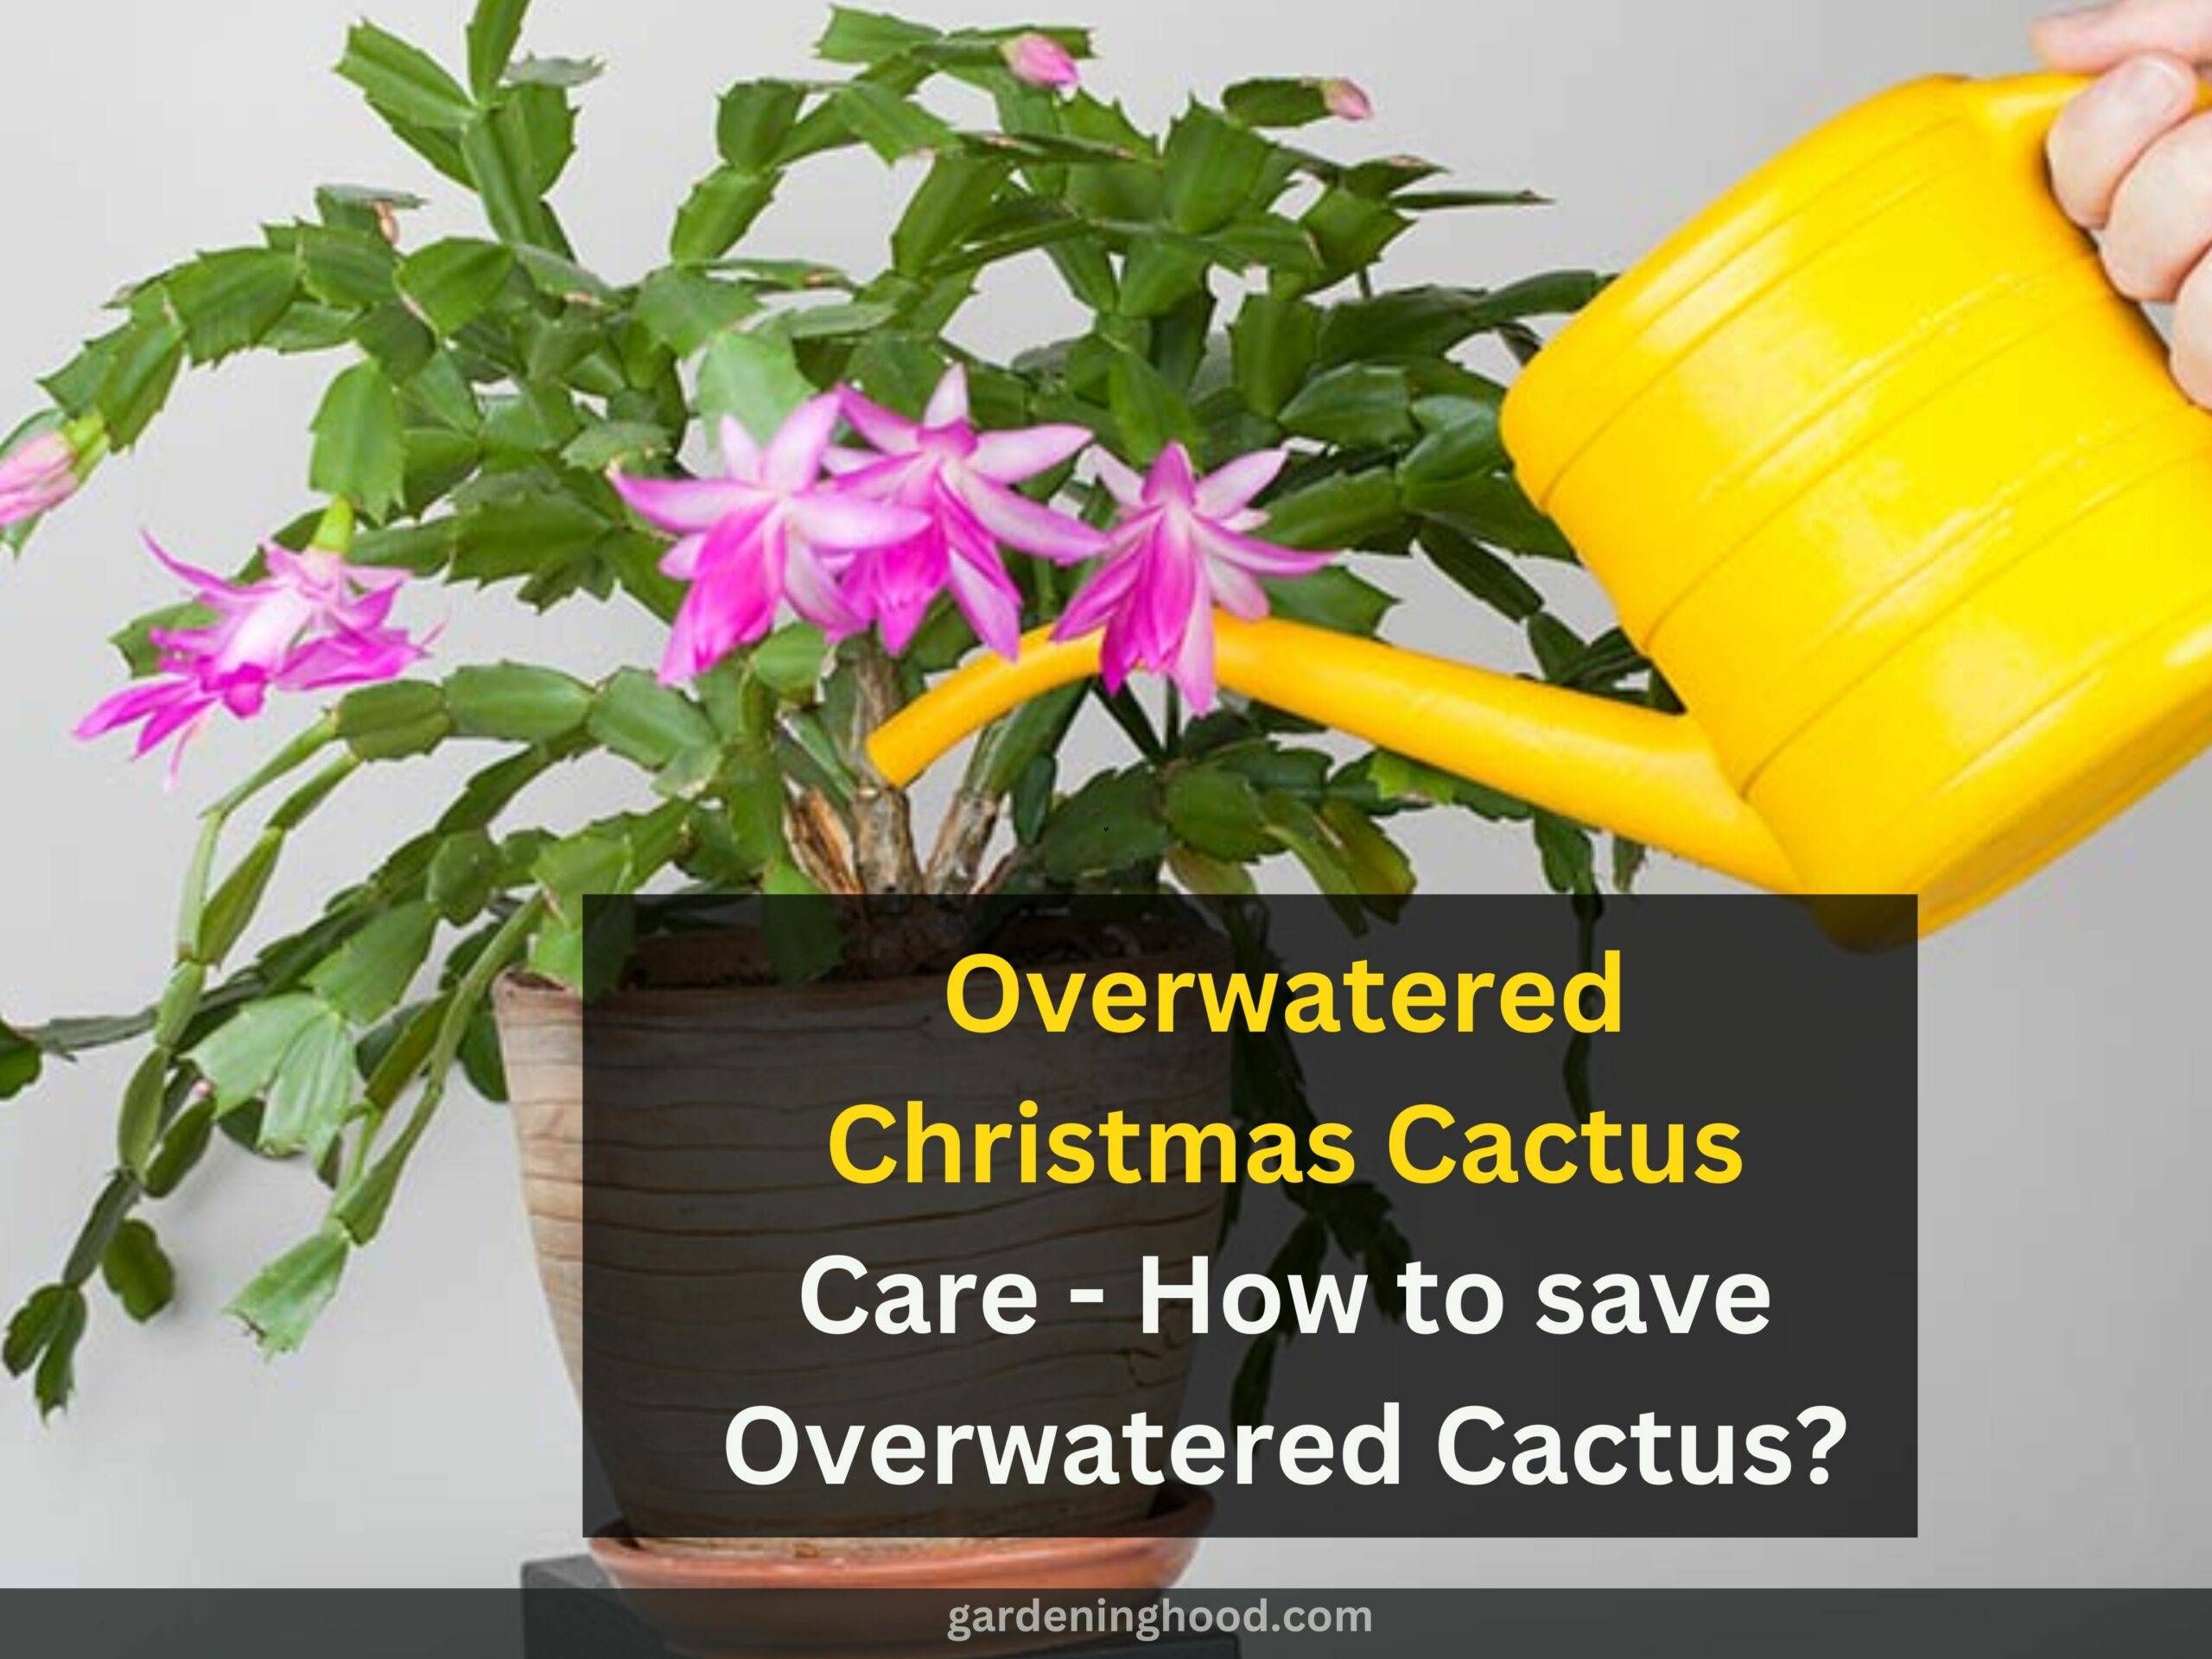 Overwatered Christmas Cactus Care - How to save Overwatered Cactus?